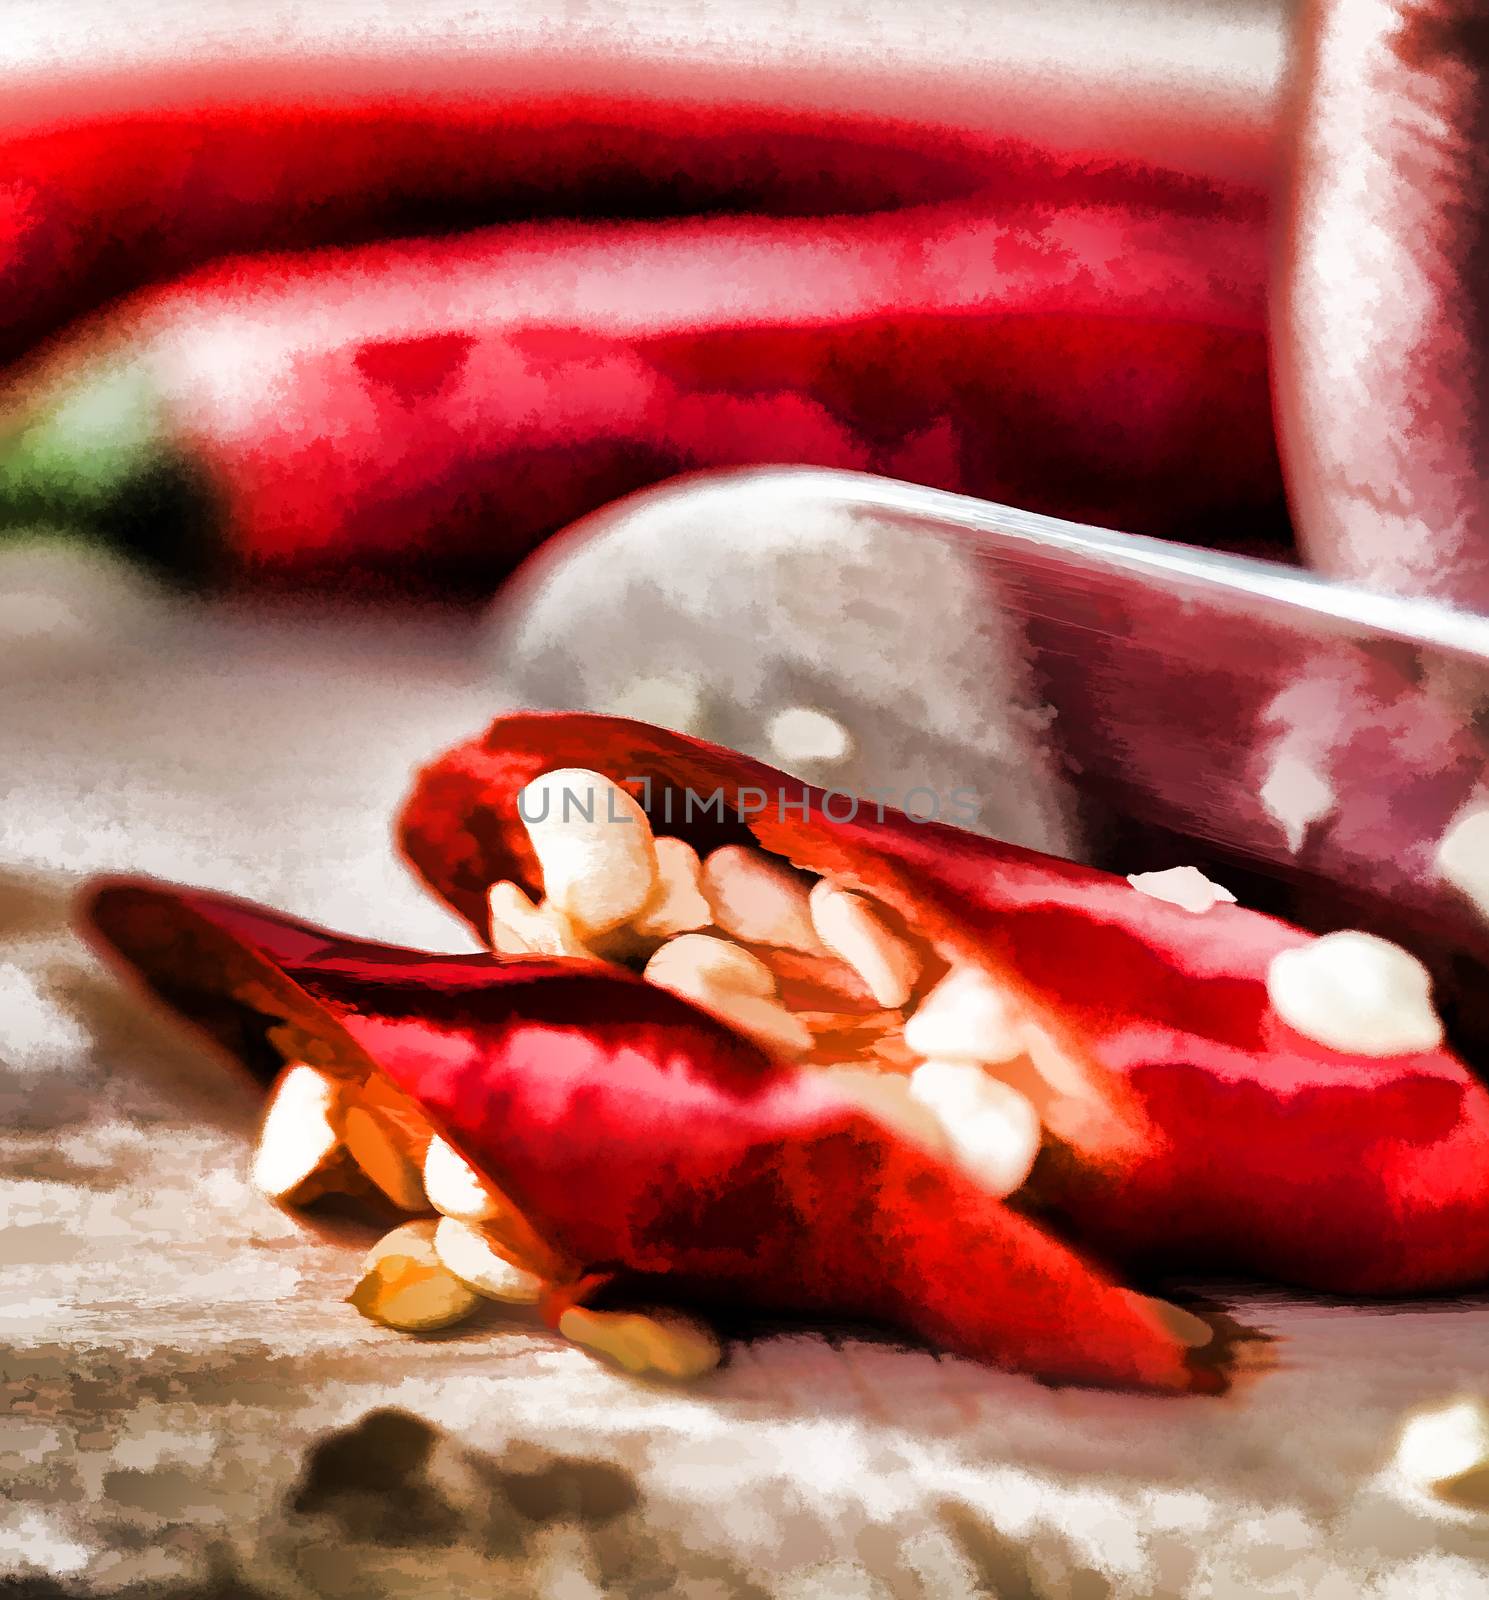 Chopping Chilli Peppers Means Hot Chilly And Spices by stuartmiles